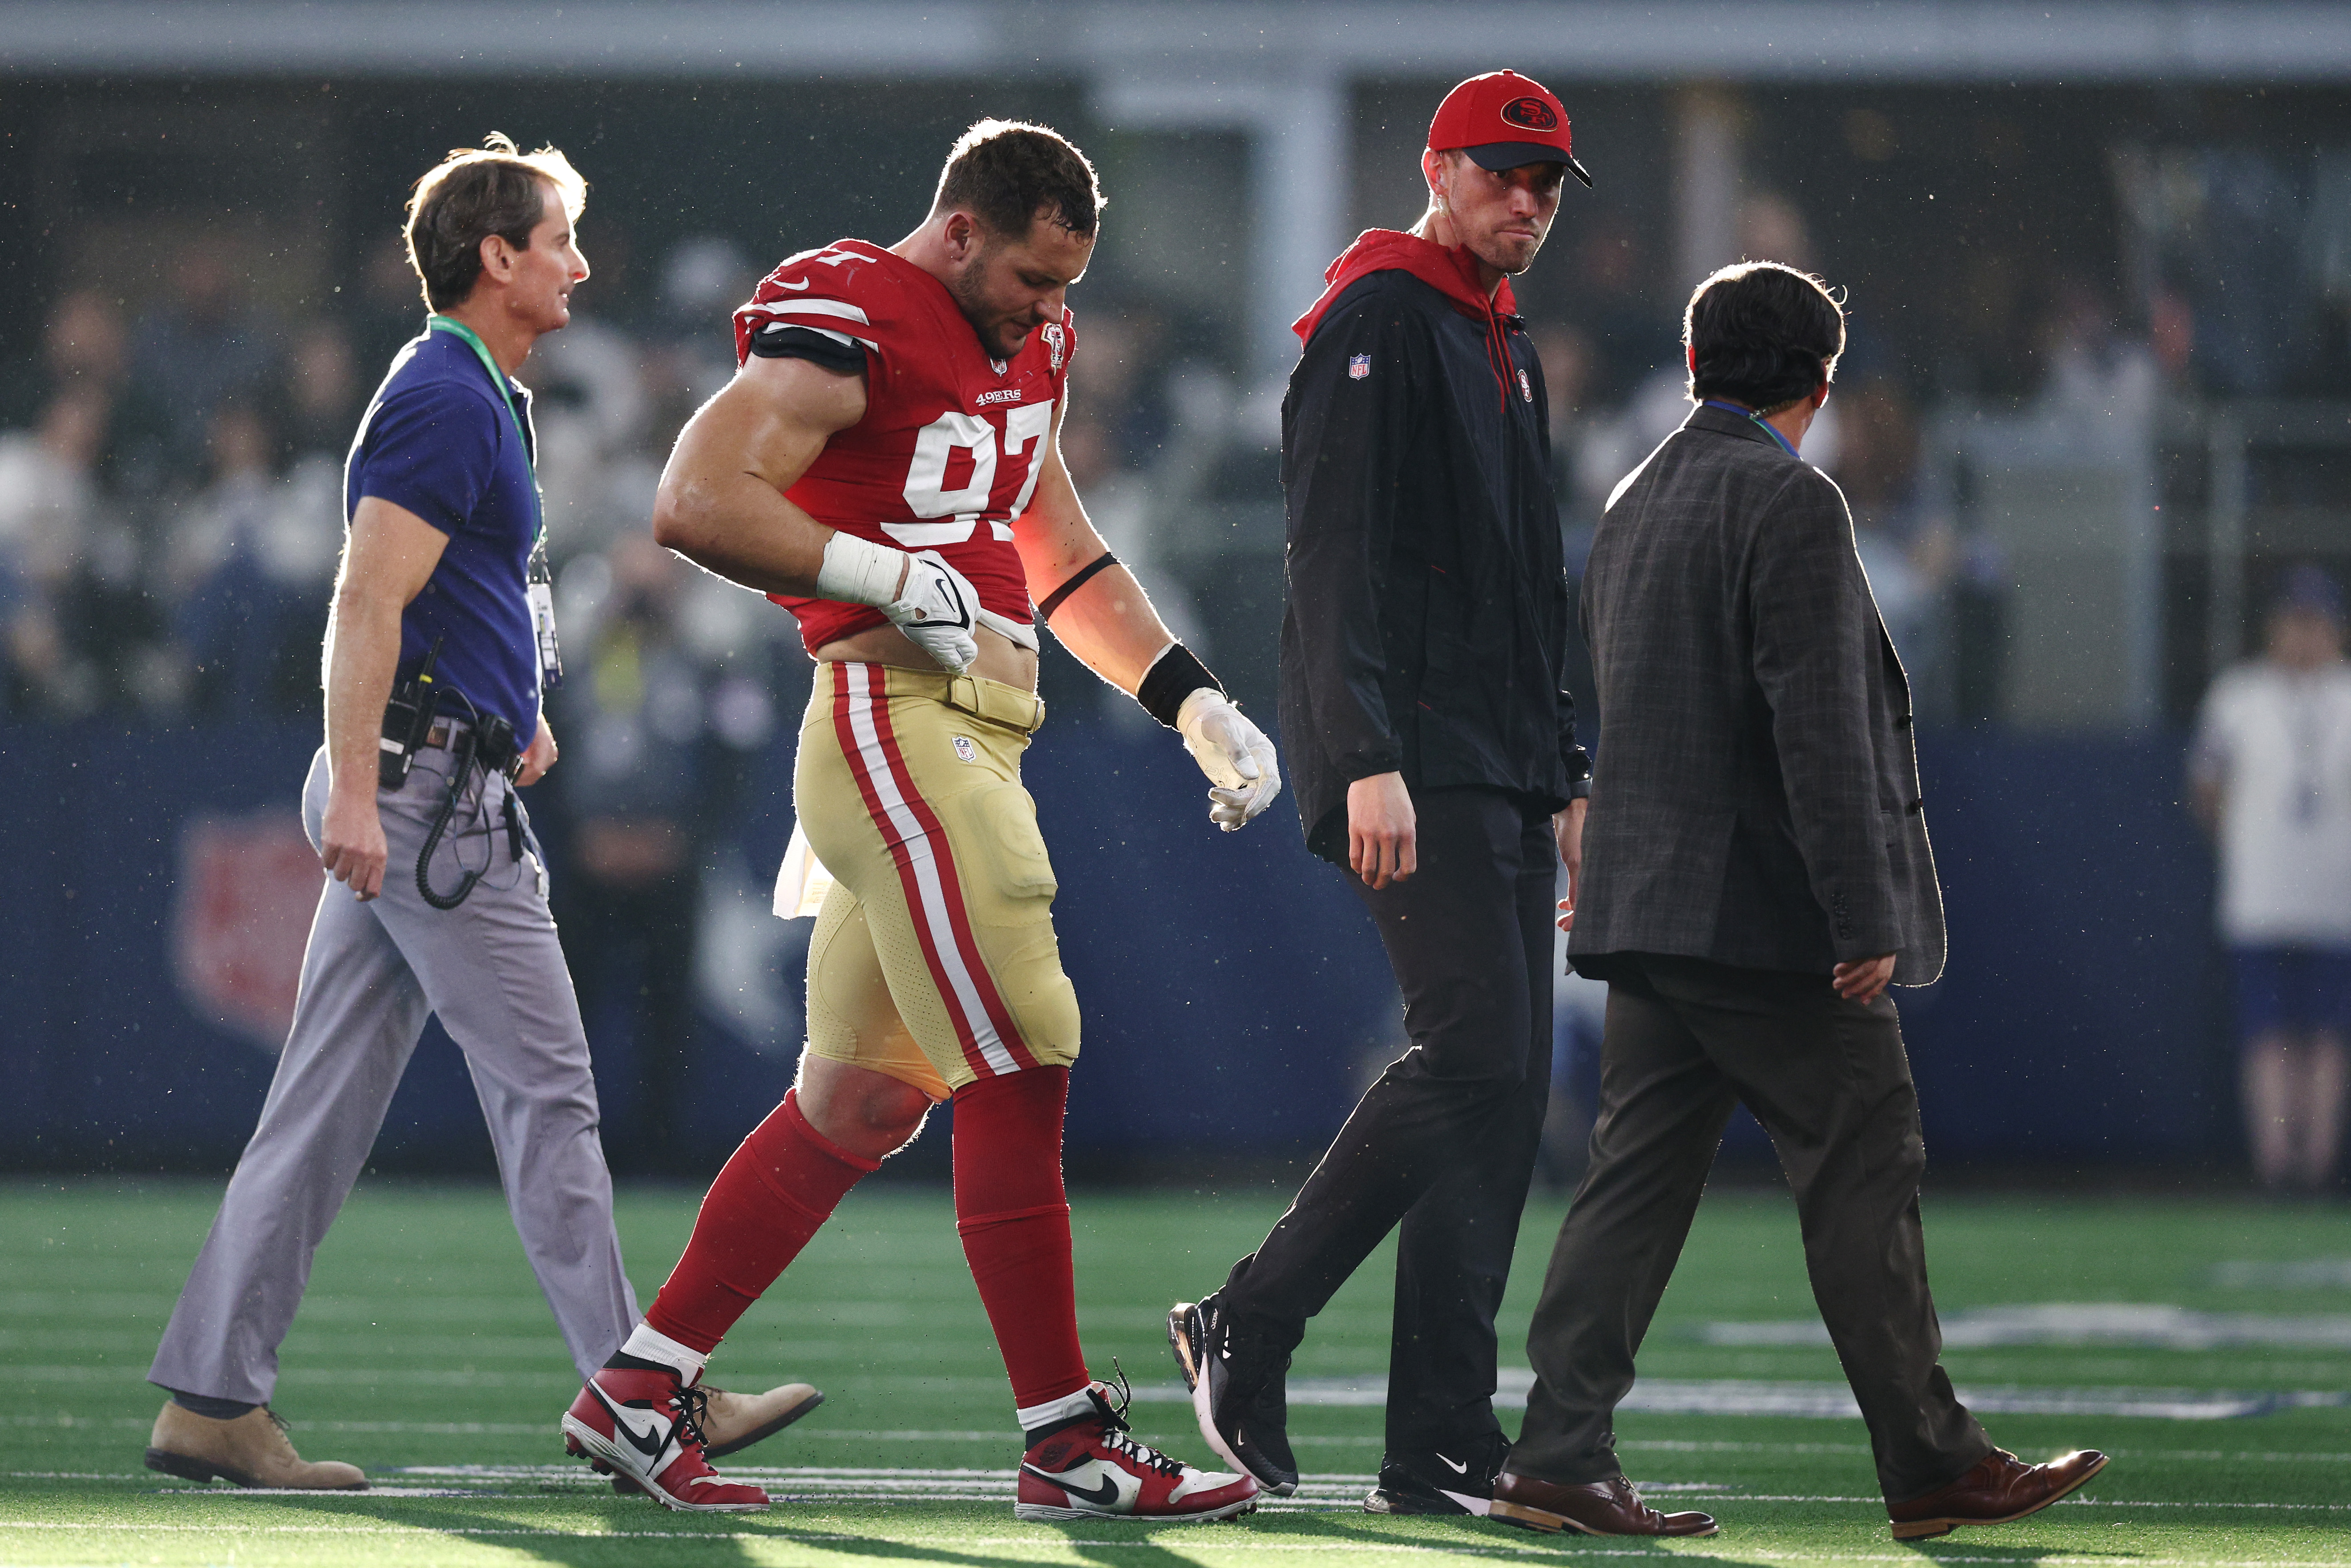 Nick Bosa #97 of the San Francisco 49ers walks off the field after an injury against the Dallas Cowboys during the second quarter in the NFC Wild Card Playoff game at AT&amp;T Stadium on January 16, 2022 in Arlington, Texas.